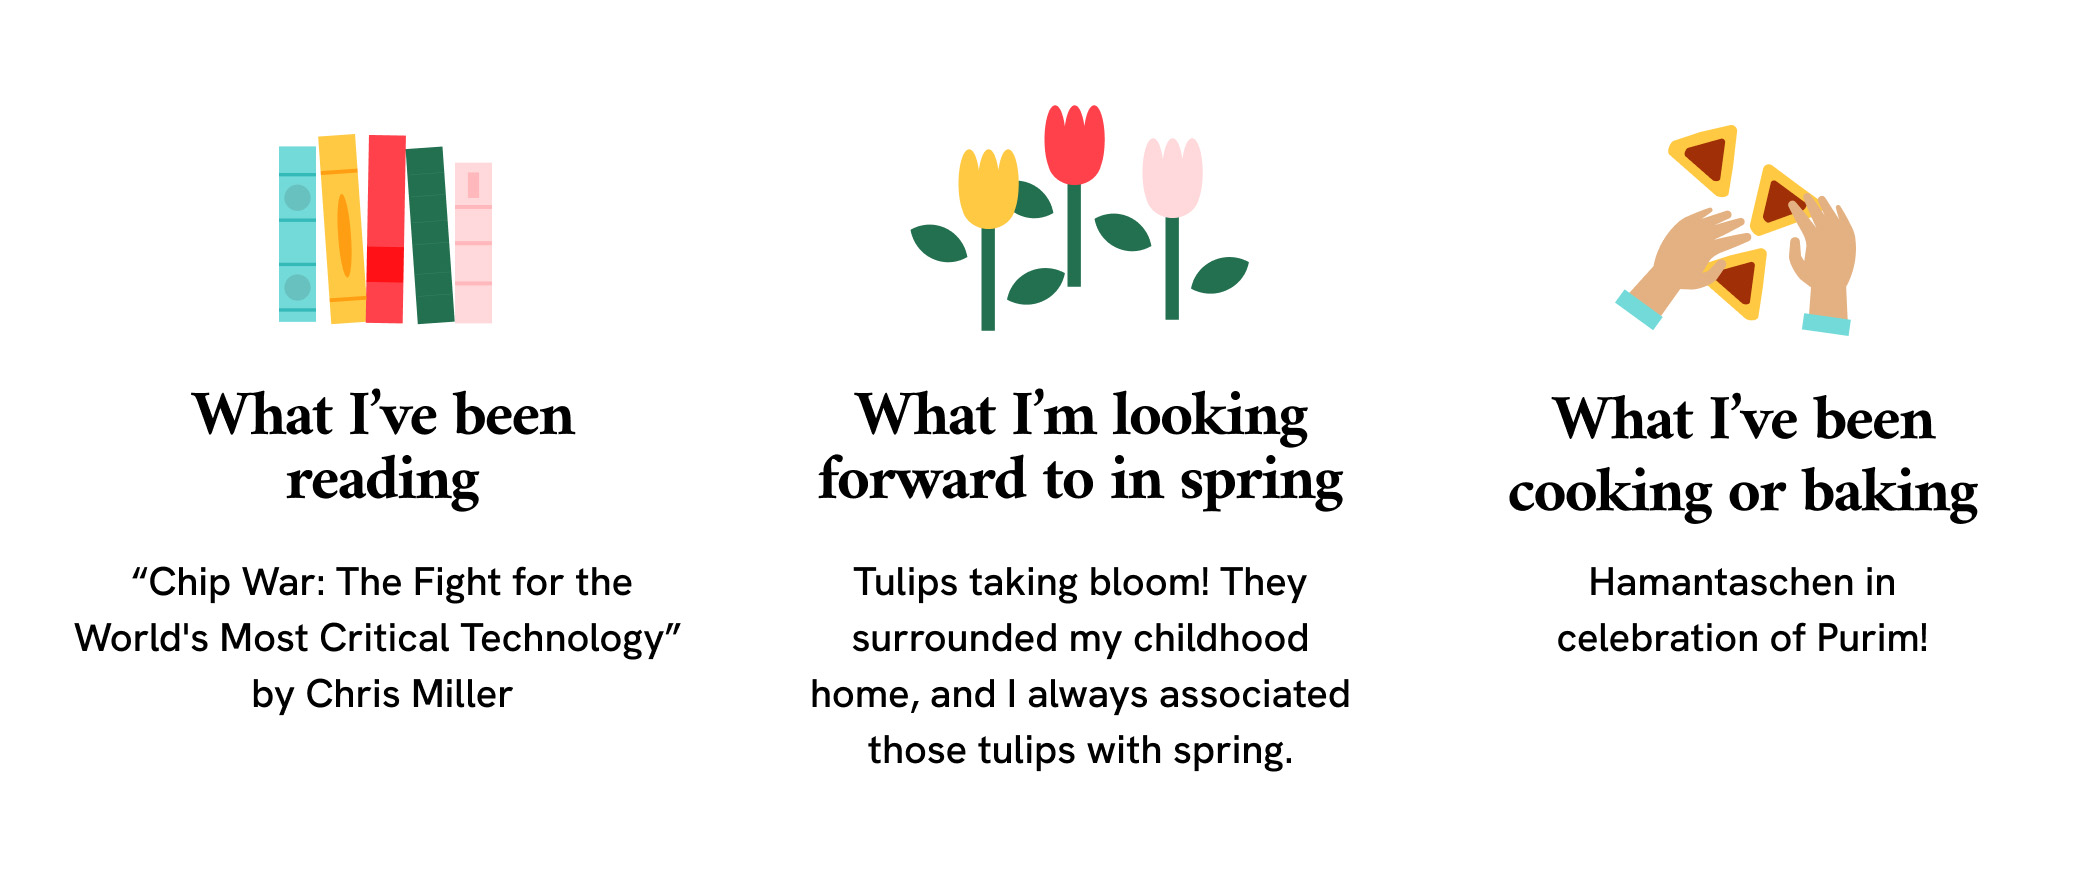 A 3-column graphic that reads, “What I’ve been reading: Chip War: The Fight for the World's Most Critical Technology by Chris Miller,” “What I’m looking forward to in spring: Tulips taking bloom! They surrounded my childhood home, and I always associated those tulips with spring.” “What I’ve been cooking or baking: Hamantaschen in celebration of Purim!” Illustrations of books, tulips and hands over triangular pastries start each column, respectively.